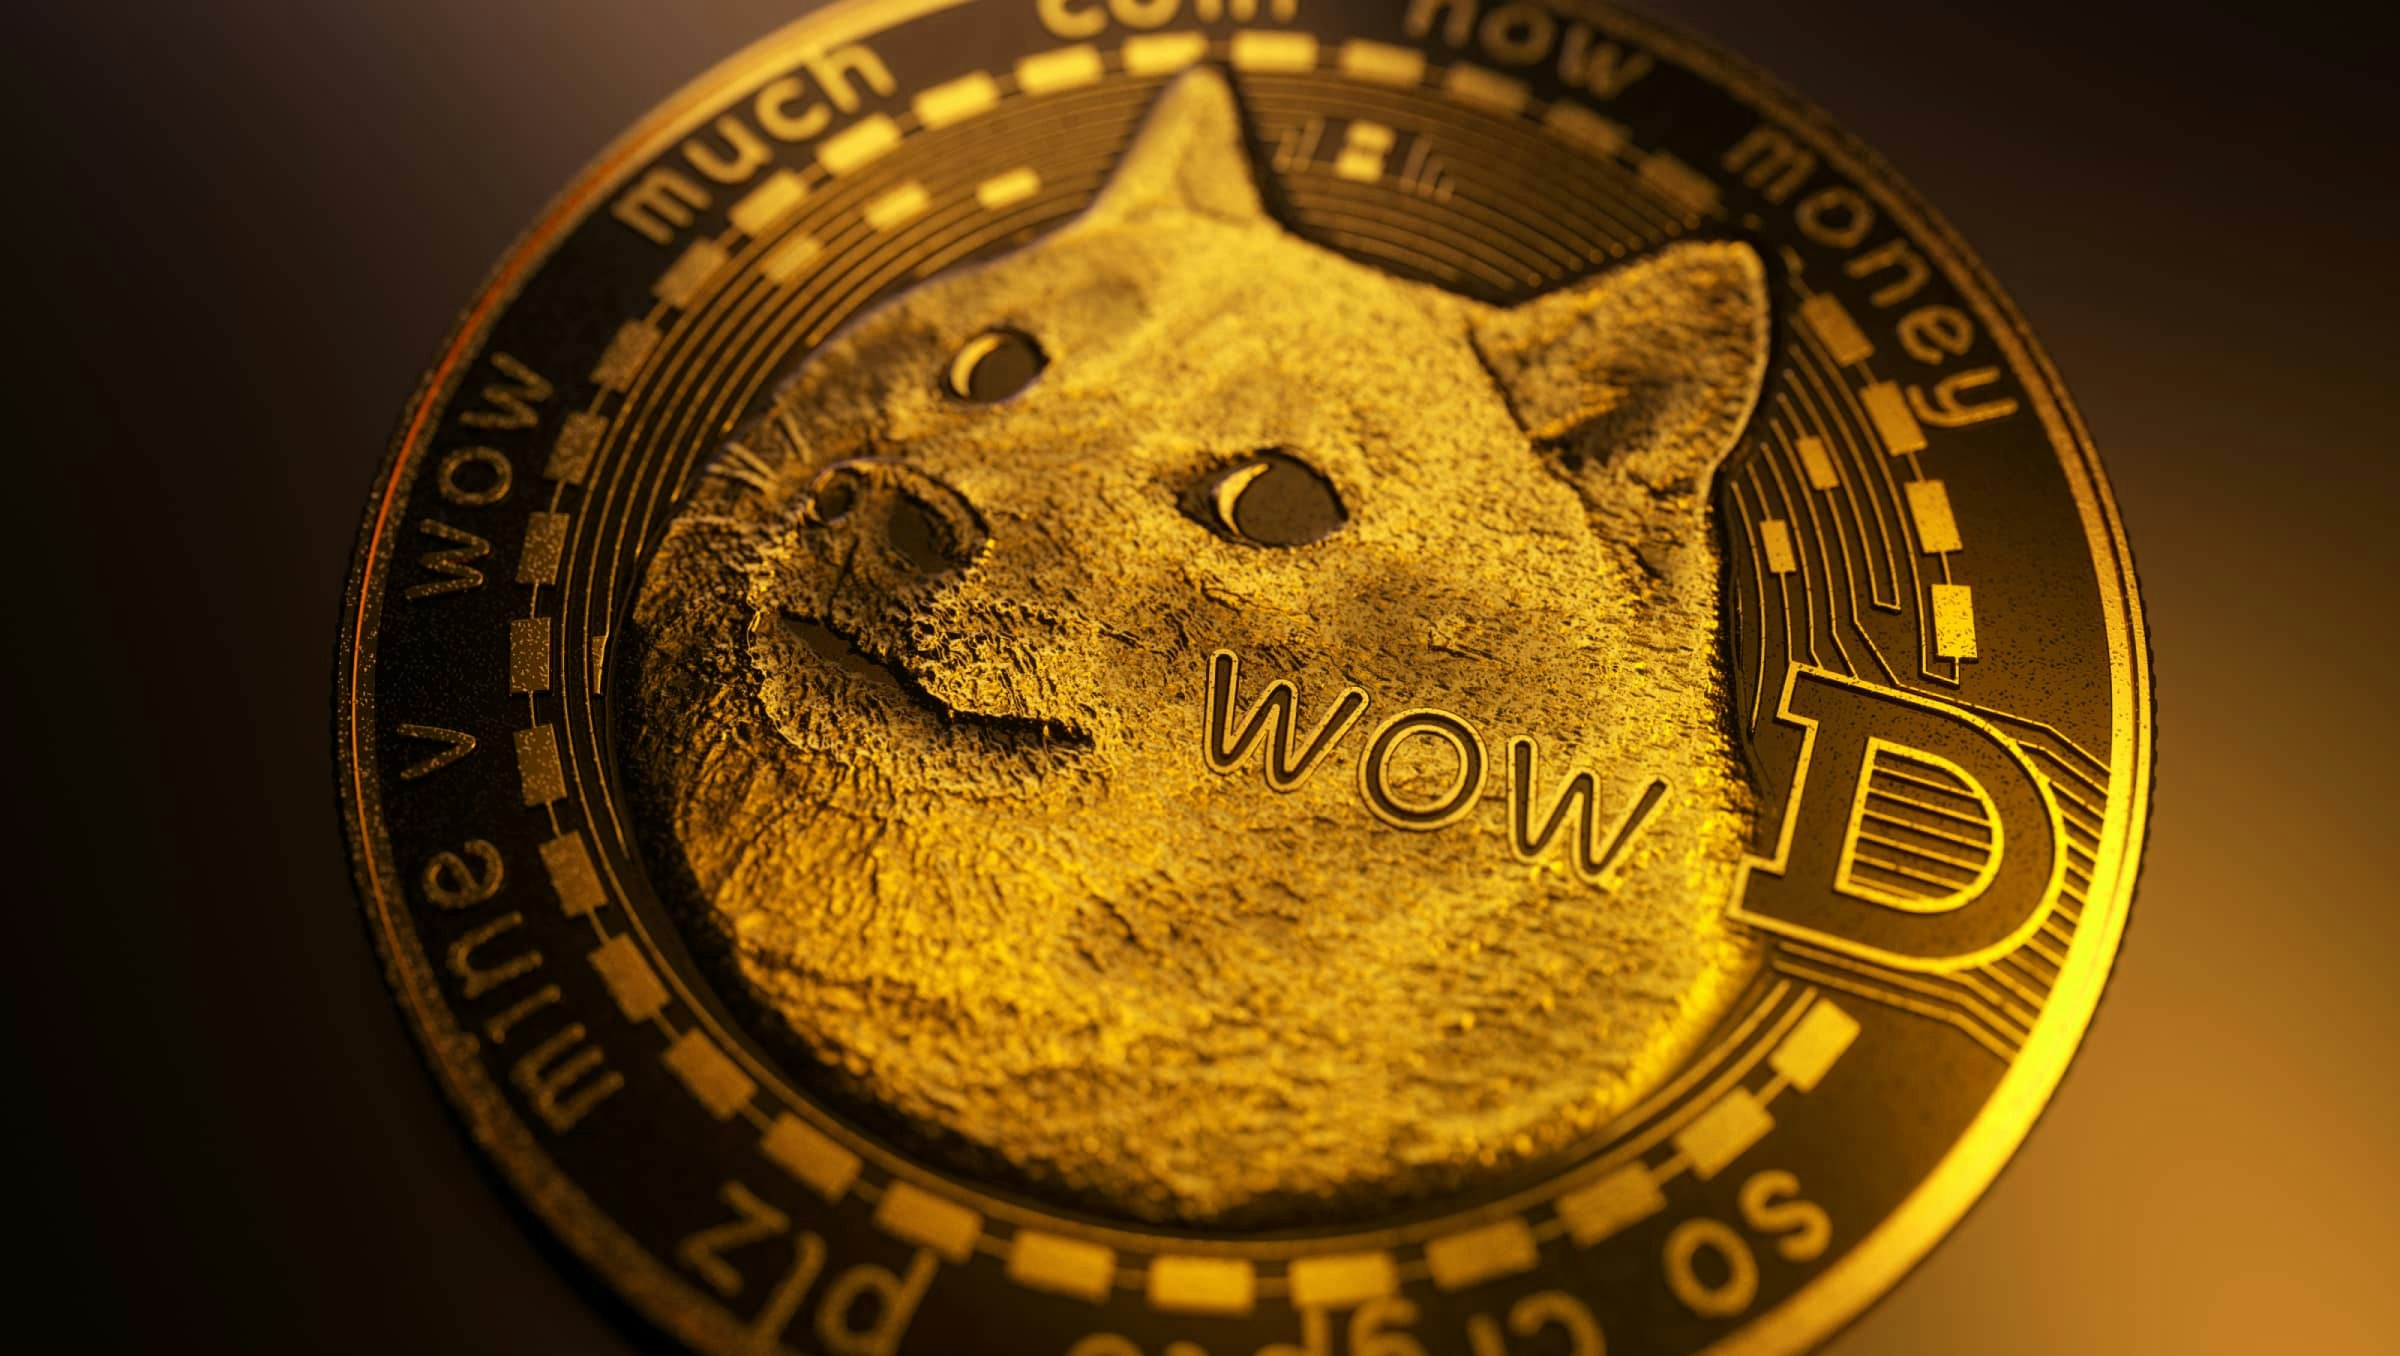 Wow at the benefits of gambling with Dogecoin